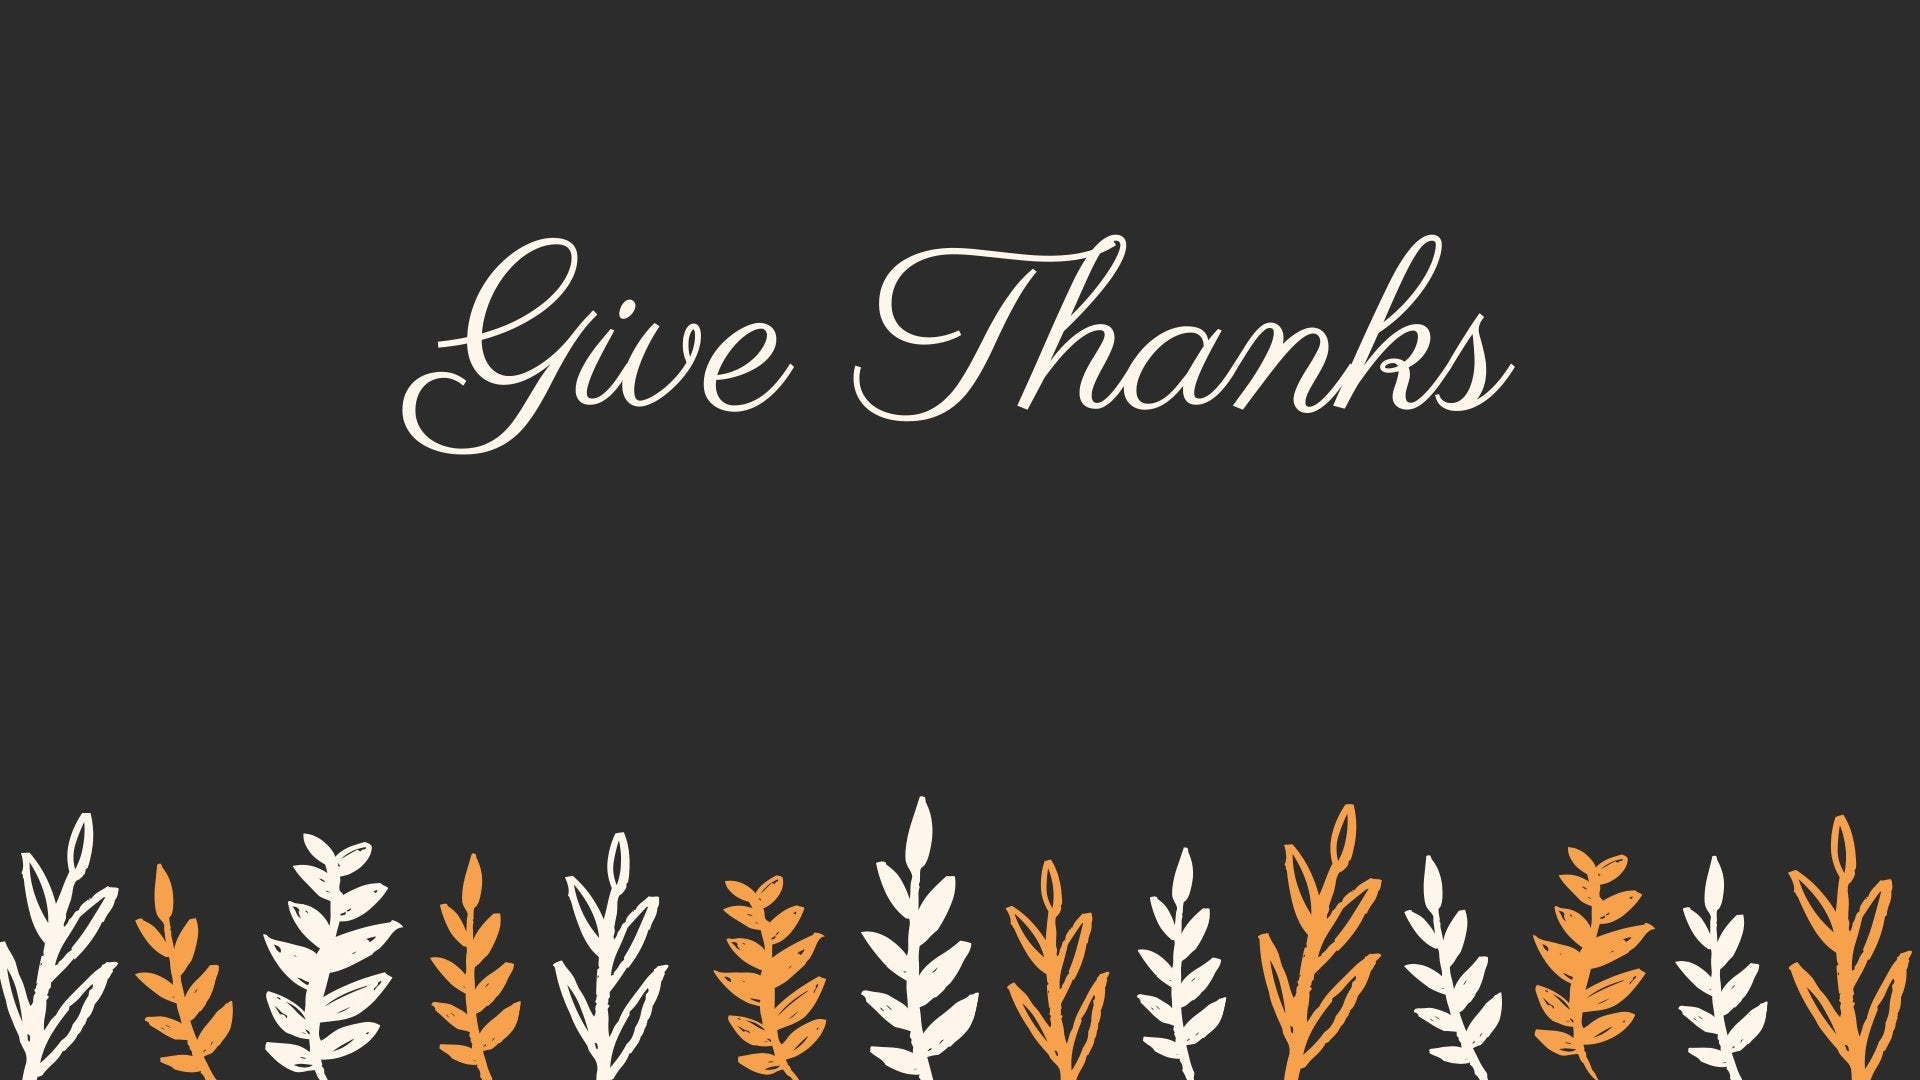 Give Thanks Desktop Wallpapers - Bee The Light